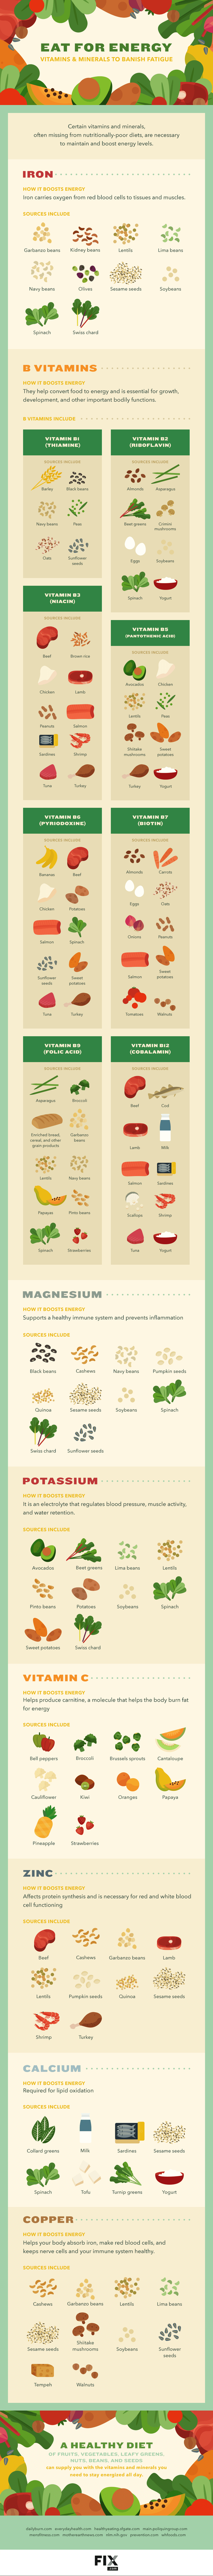 Say Fatigue Goodbye With These Powerful Vitamins And Minerals Infographic